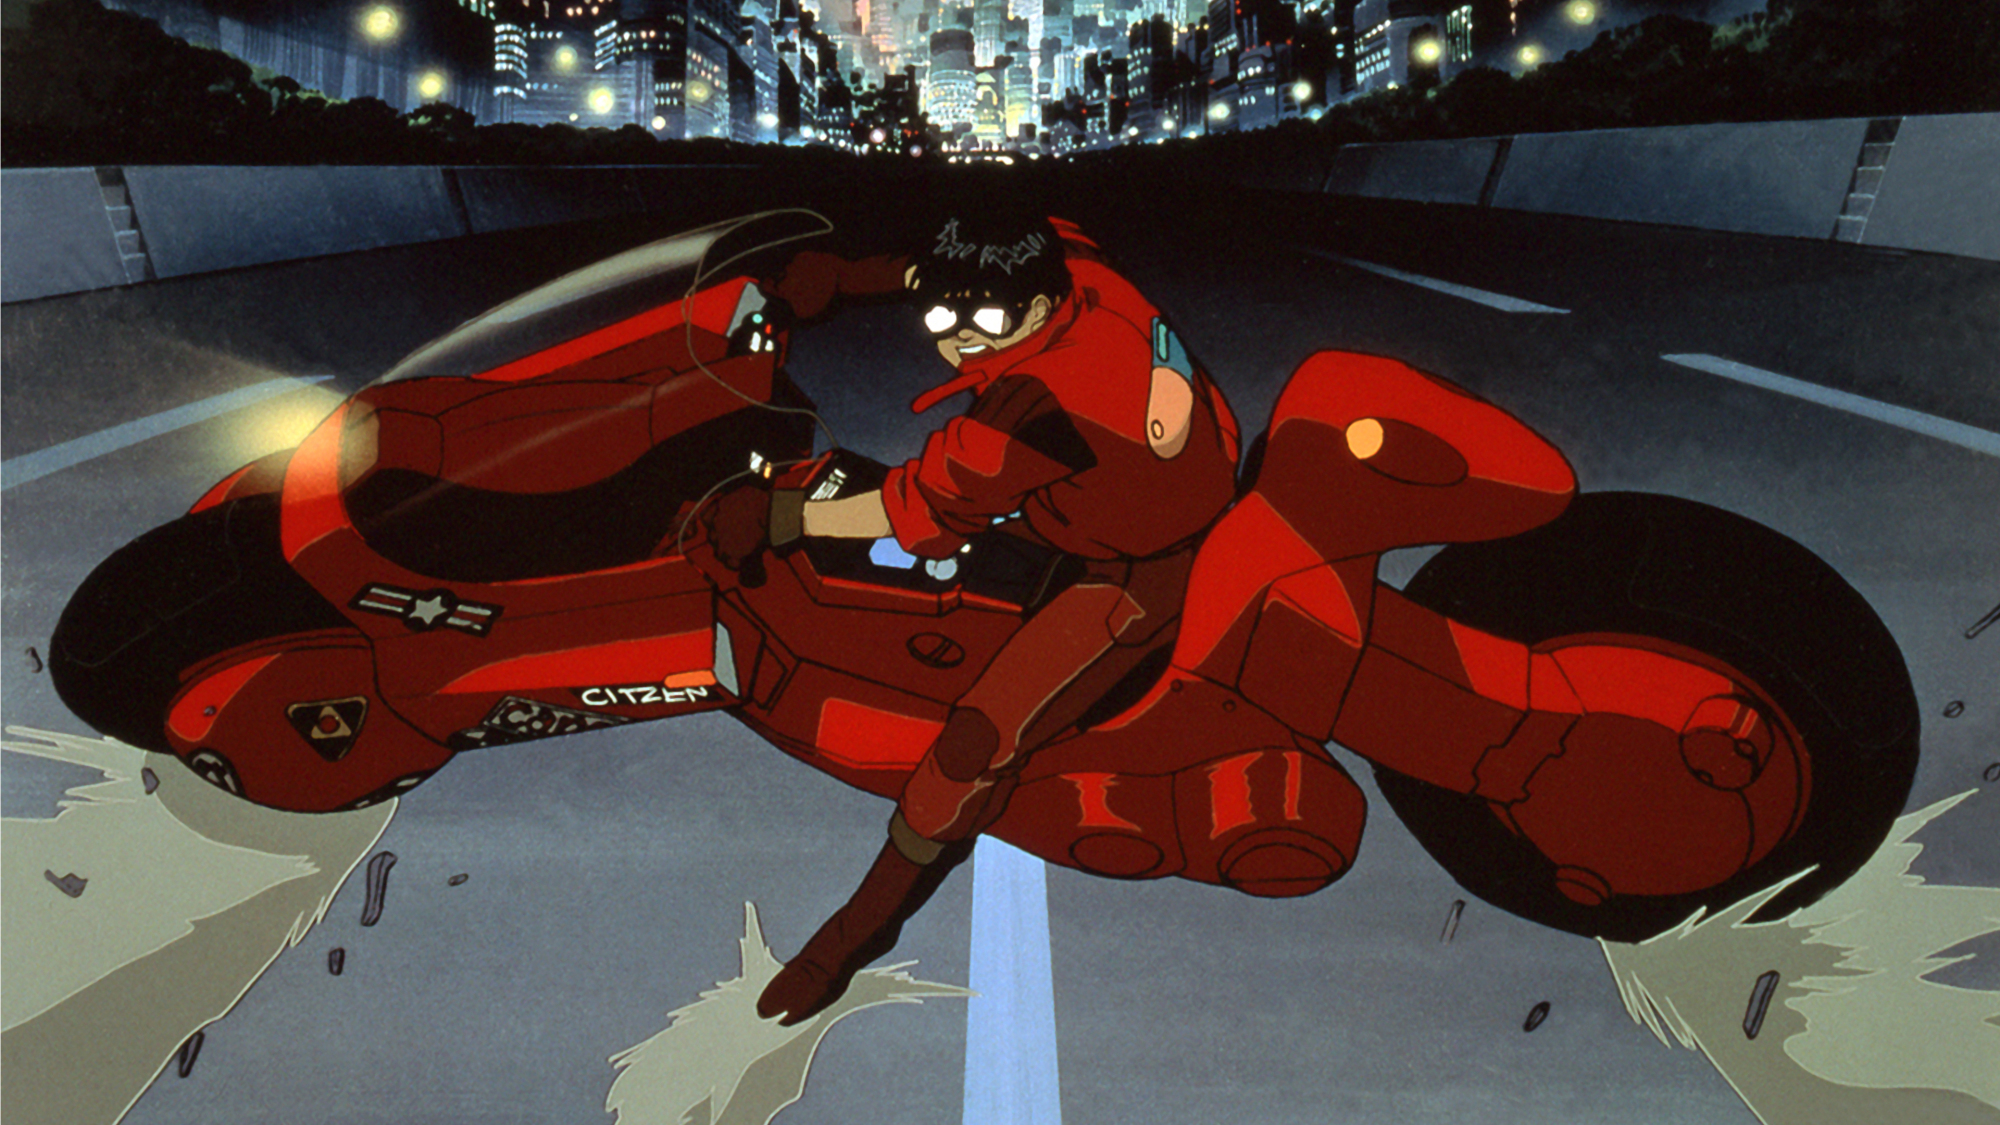 Post-apocalyptic: 1988's 'Akira' told the story of a dystopian Tokyo in 2019. | &#169; 1988 MUSHROOM/ AKIRA PRODUCTION COMMITTEE